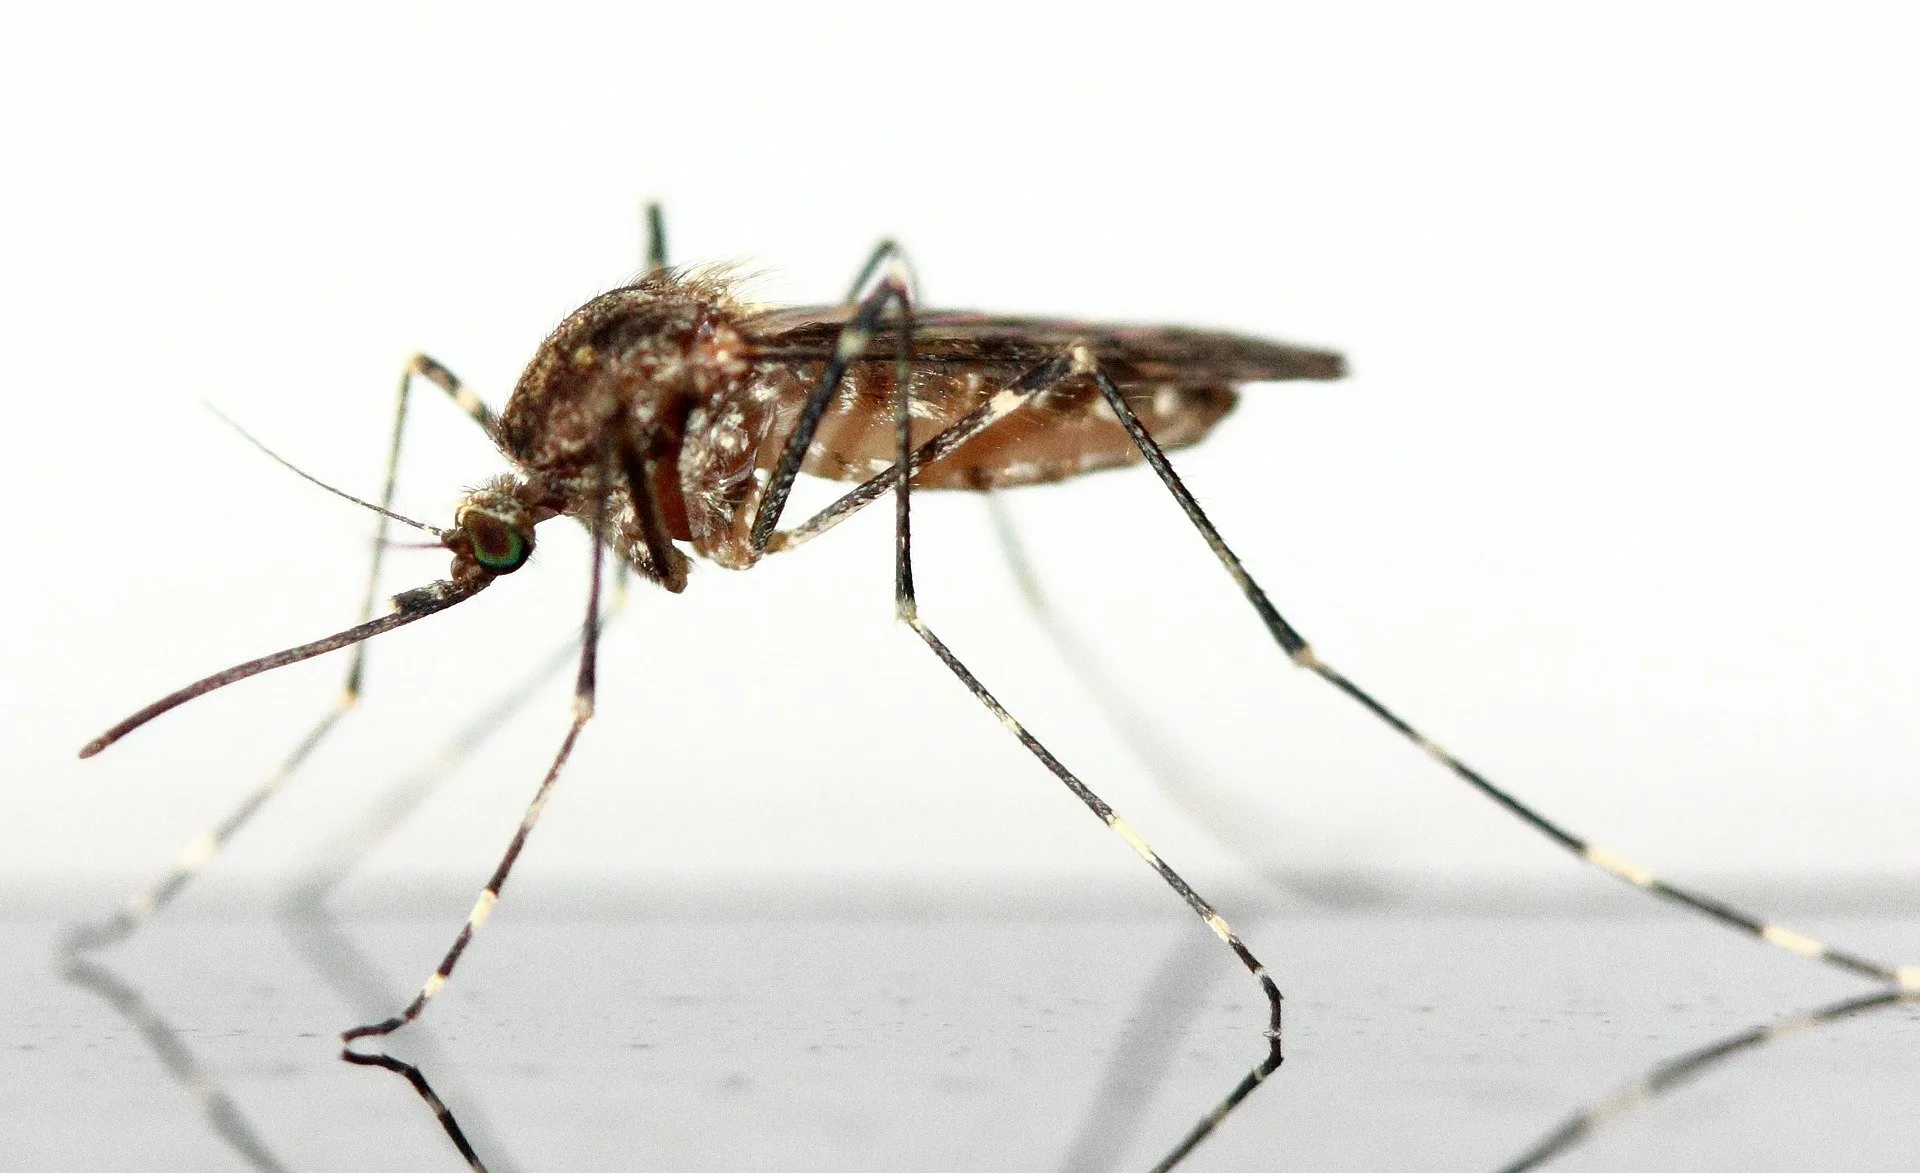 Malaria: Ongoing Solutions To Eradicate It By 2040